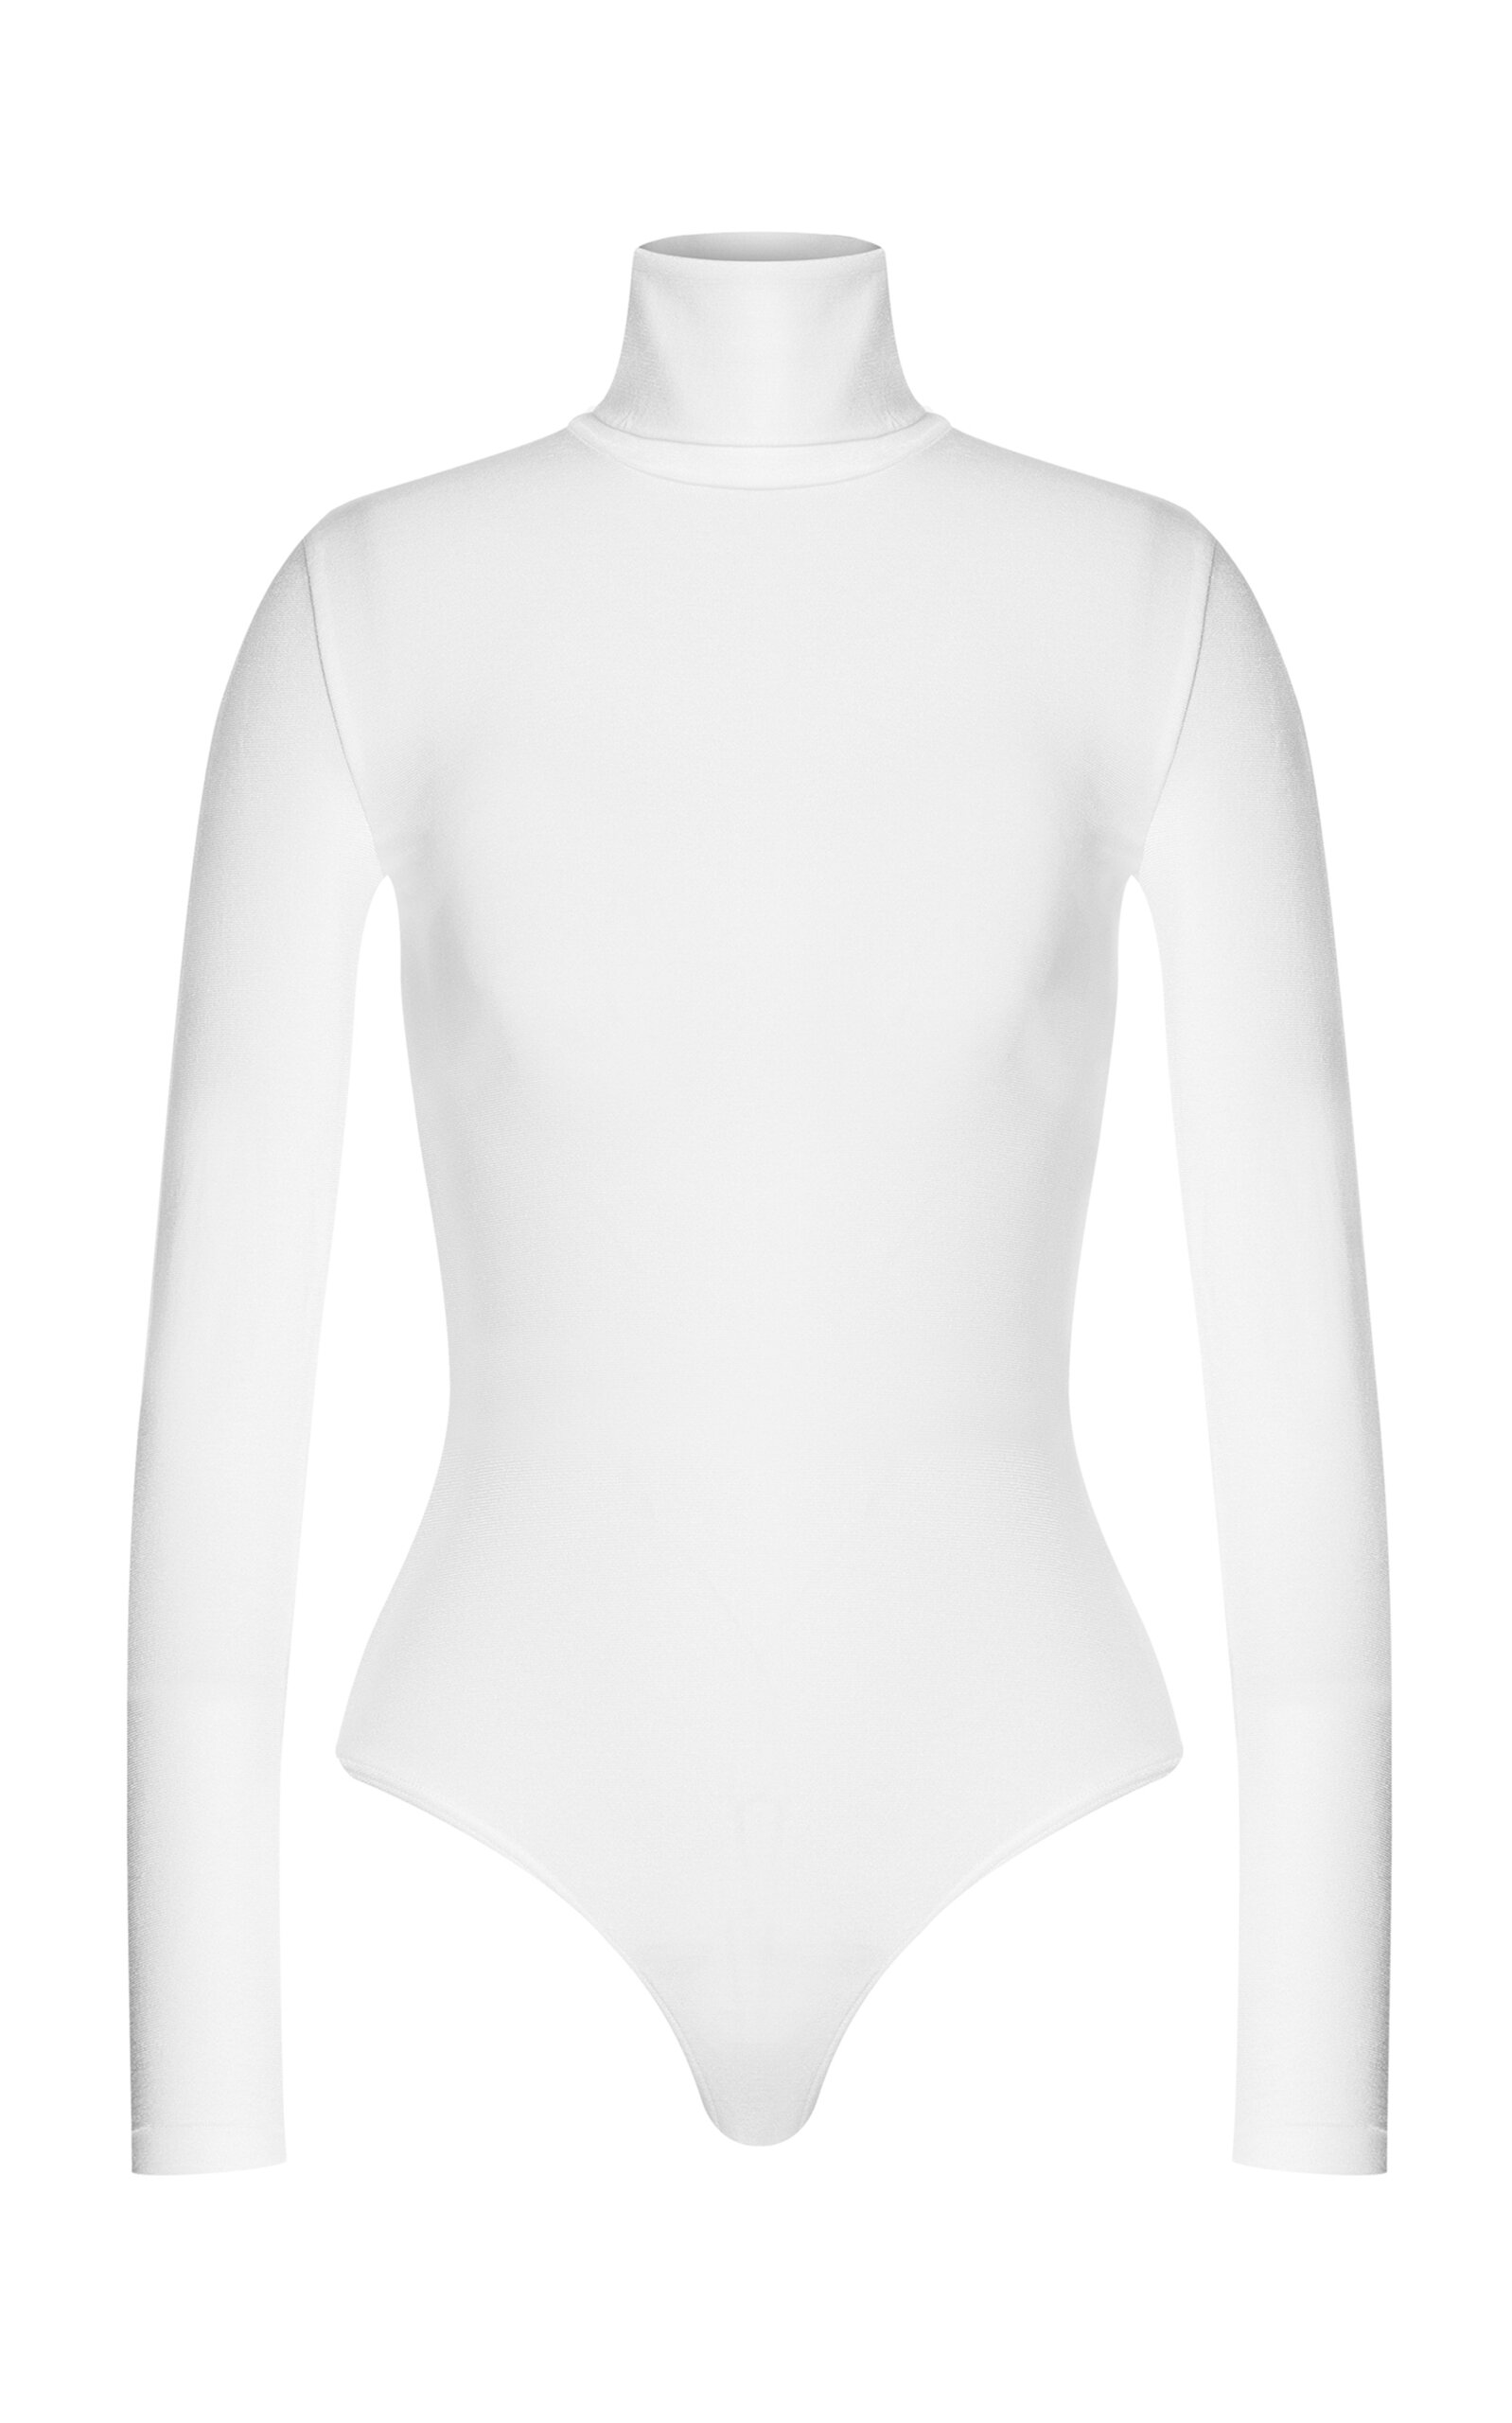 https://www.modaoperandi.com/assets/images/products/949954/588354/large_wolford-white-colorado-string-body.jpg?_t=1684532024